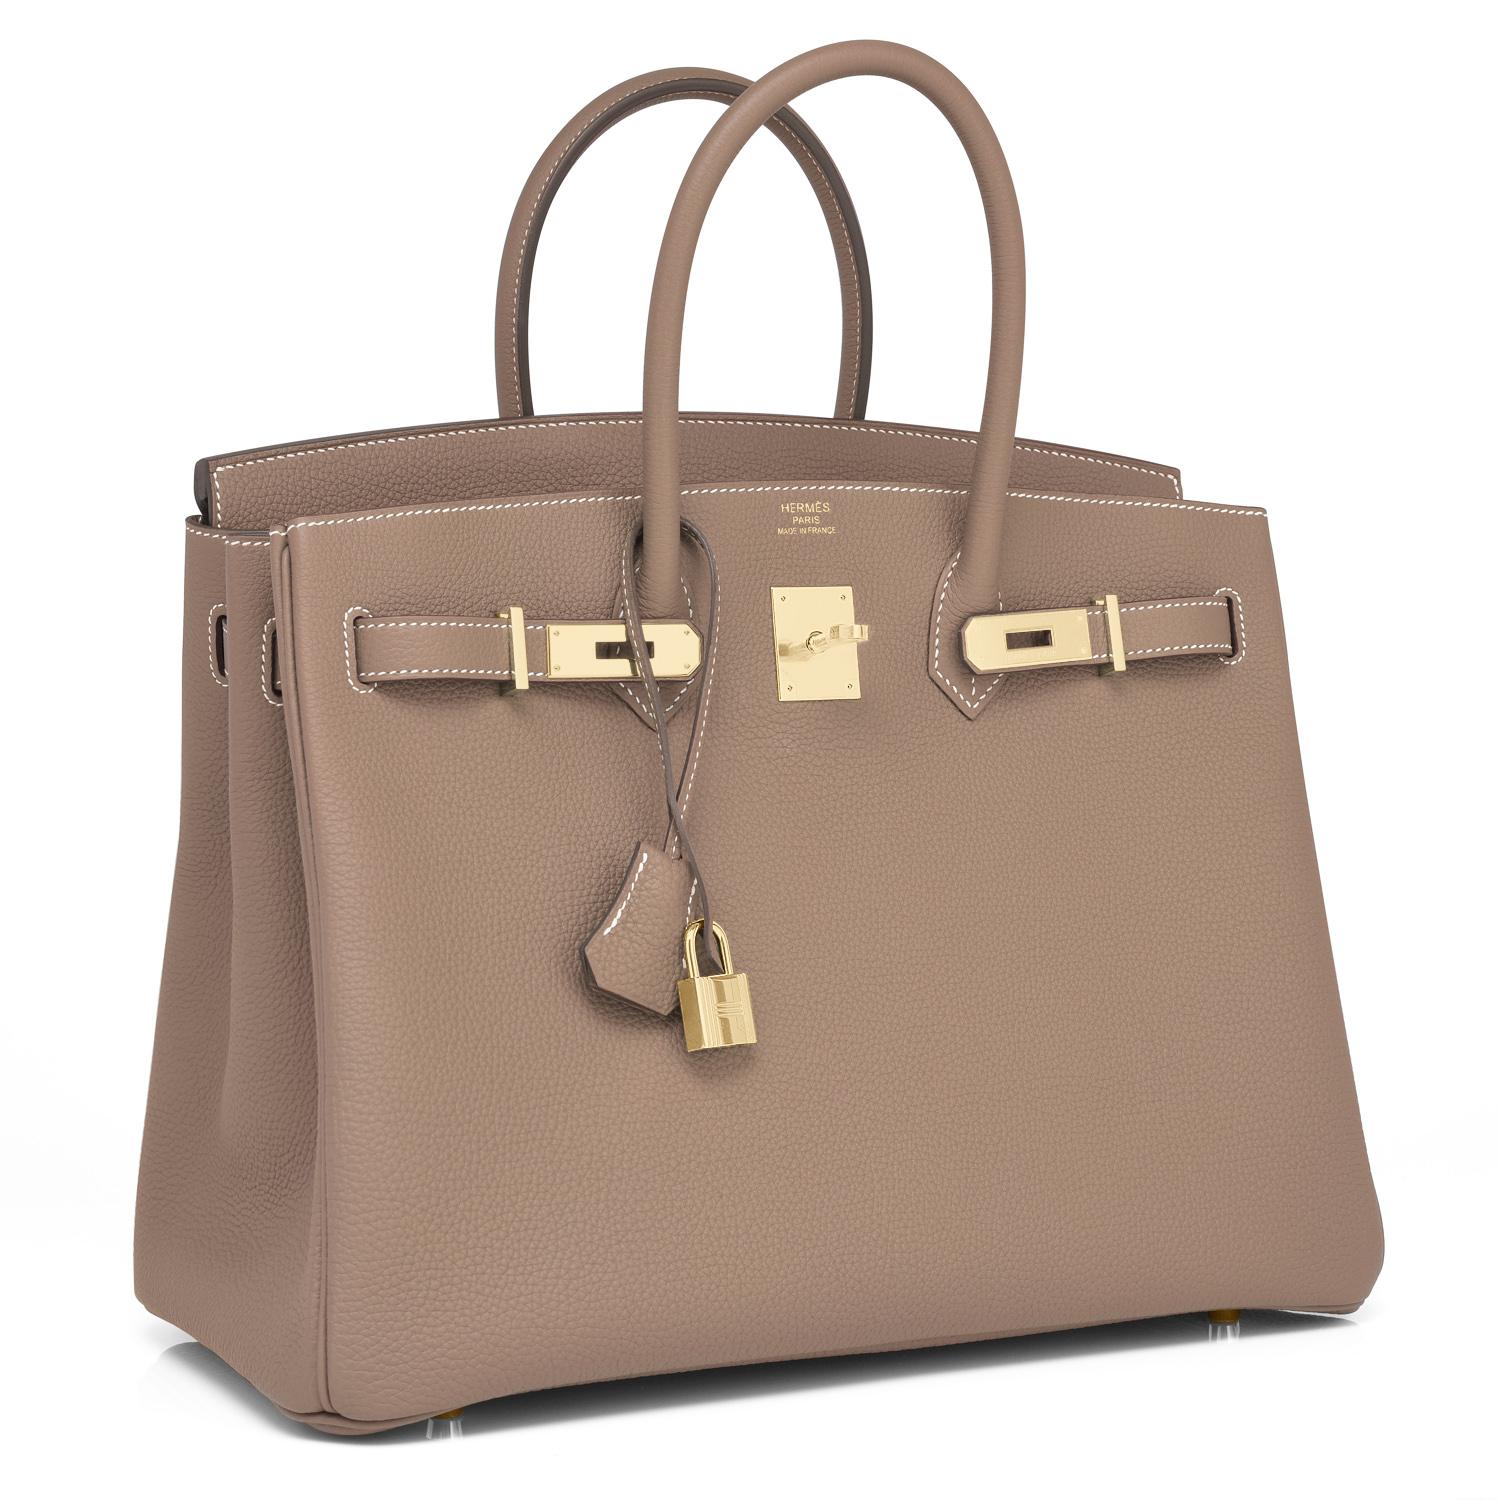 Hermes Etoupe Togo 35cm Birkin Gold Hardware 
Brand New in Box. Store fresh. Pristine Condition (with plastic on hardware). 
Perfect gift! Comes in full set with lock, keys, clochette, sleeper, raincoat, and orange Hermes box.
Here it is - the celeb